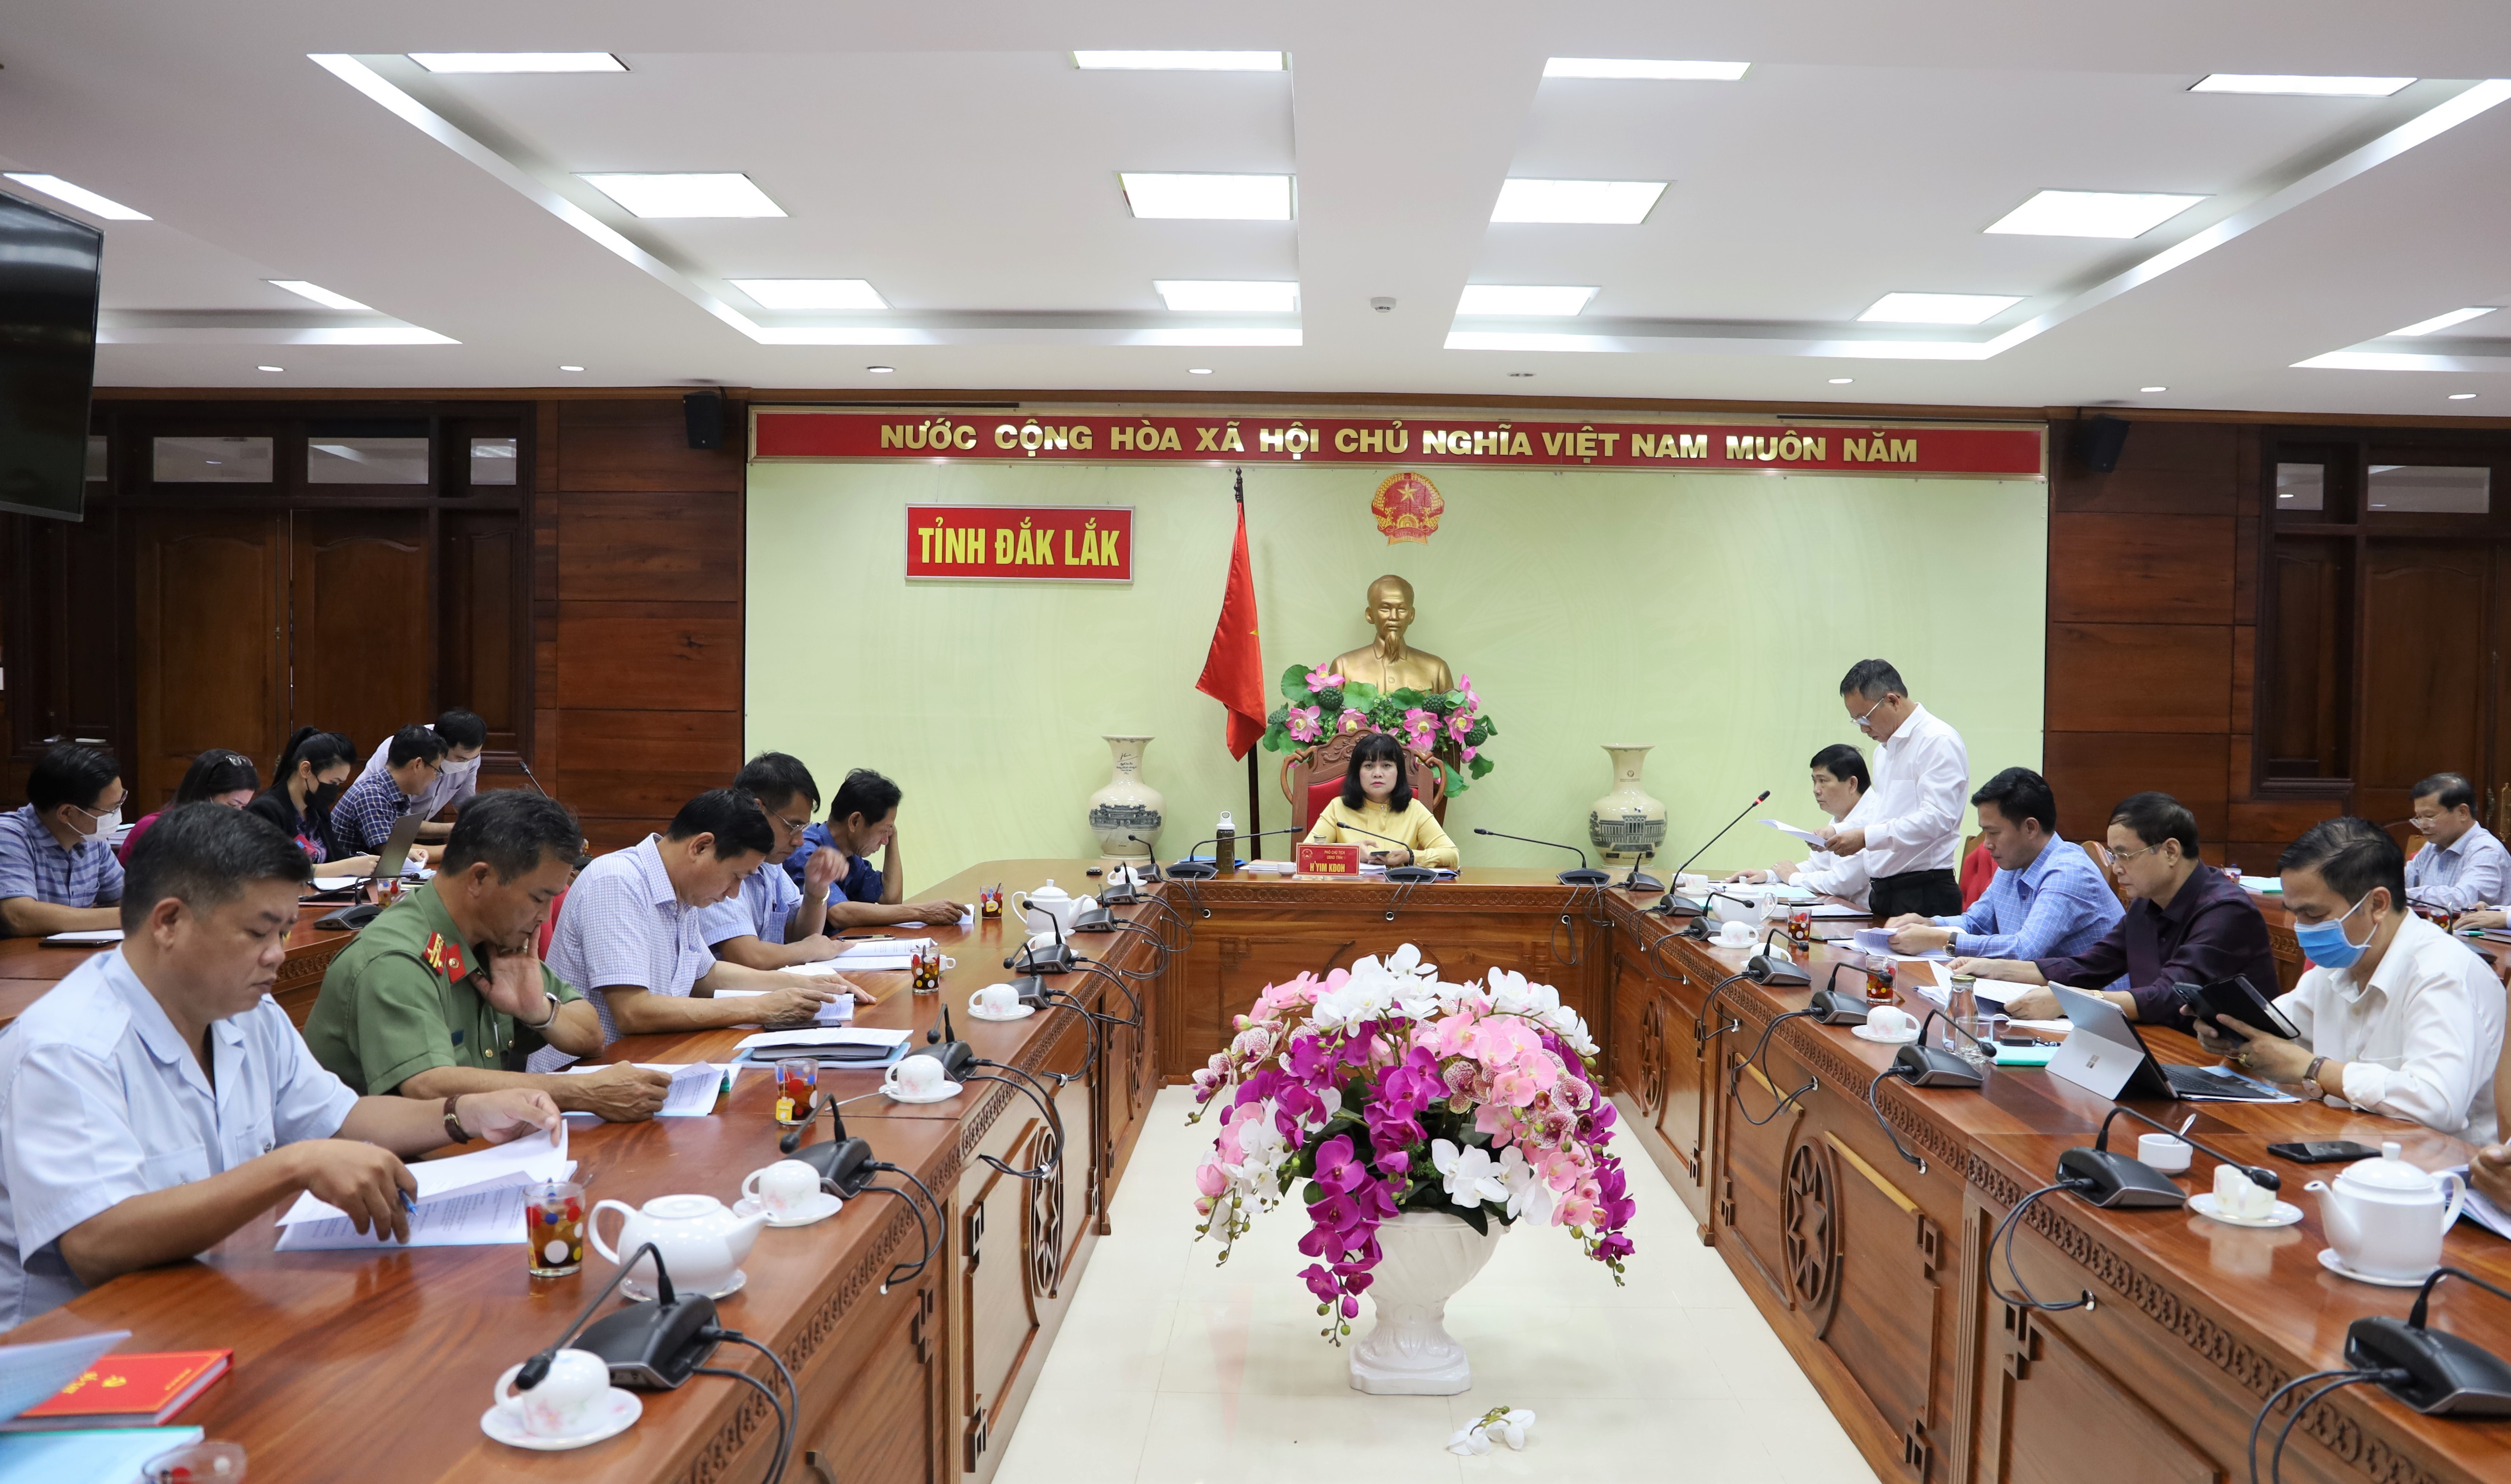 A meeting of the Steering Committee for the High School Graduation Exam 2022 of Dak Lak Province